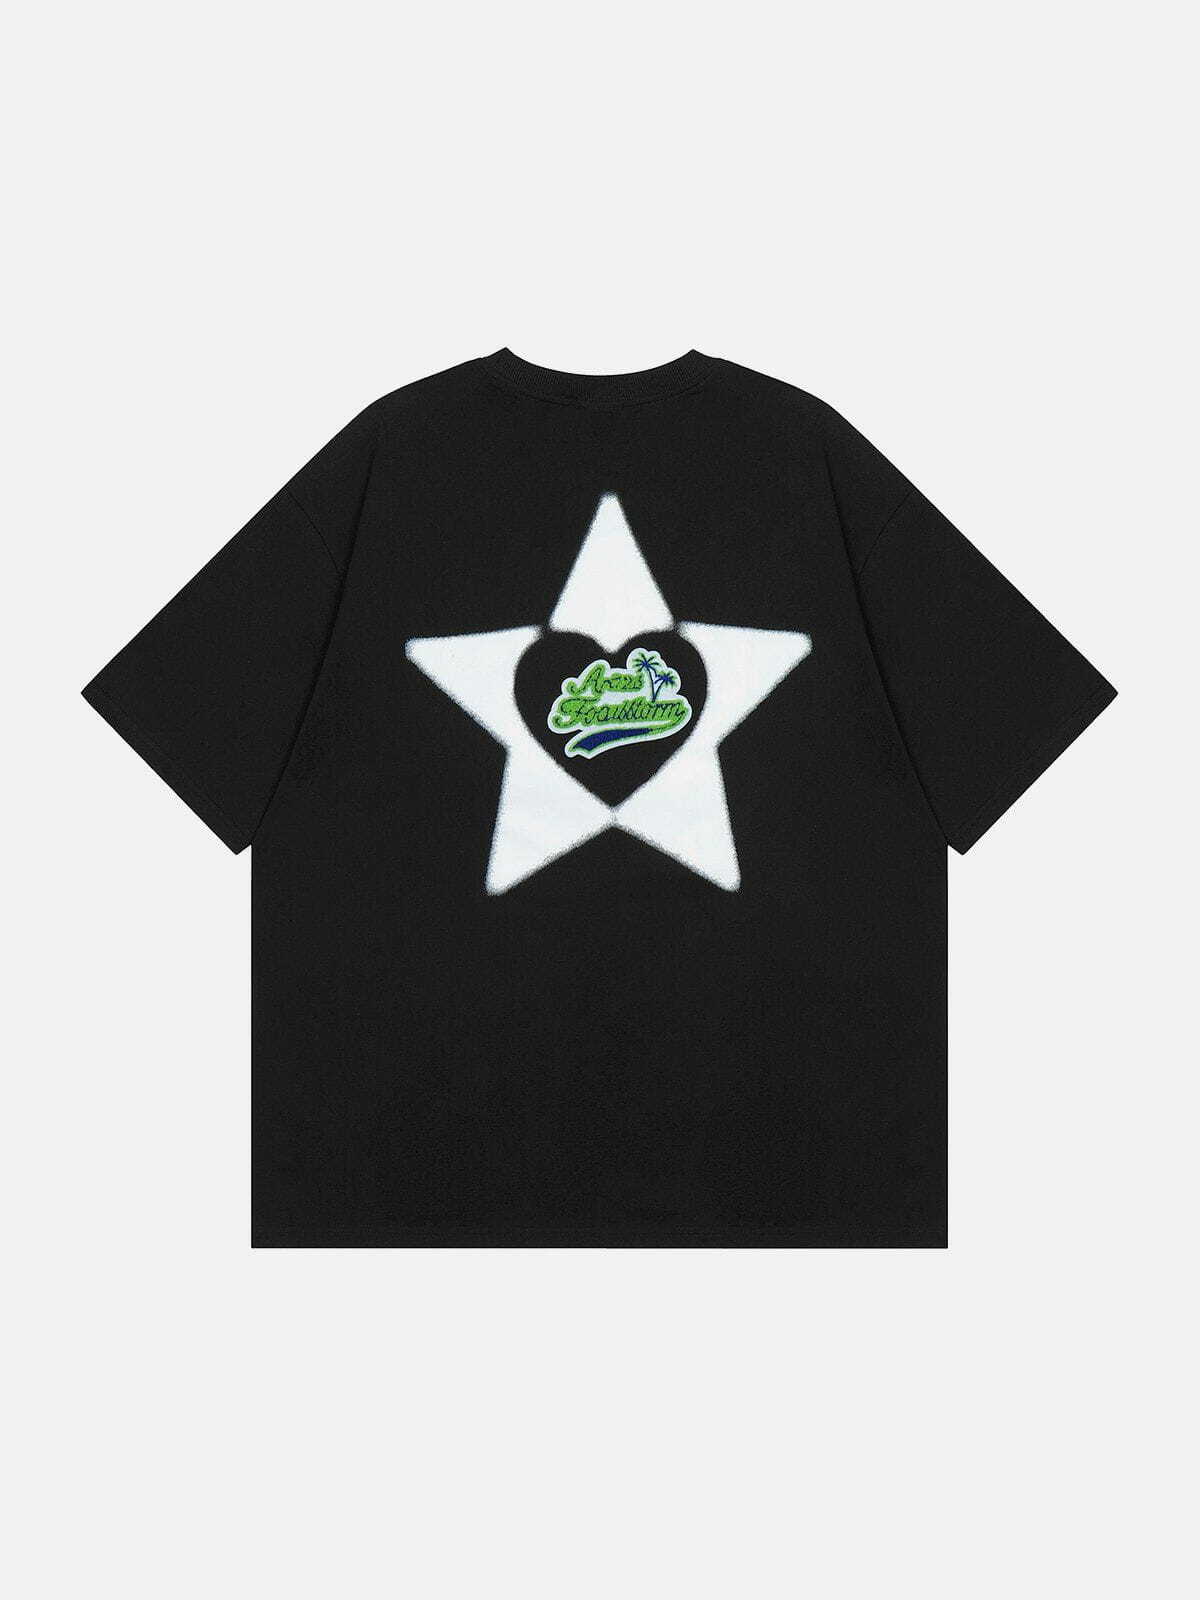 embroidered star tee trendy & youthful streetwear 7933